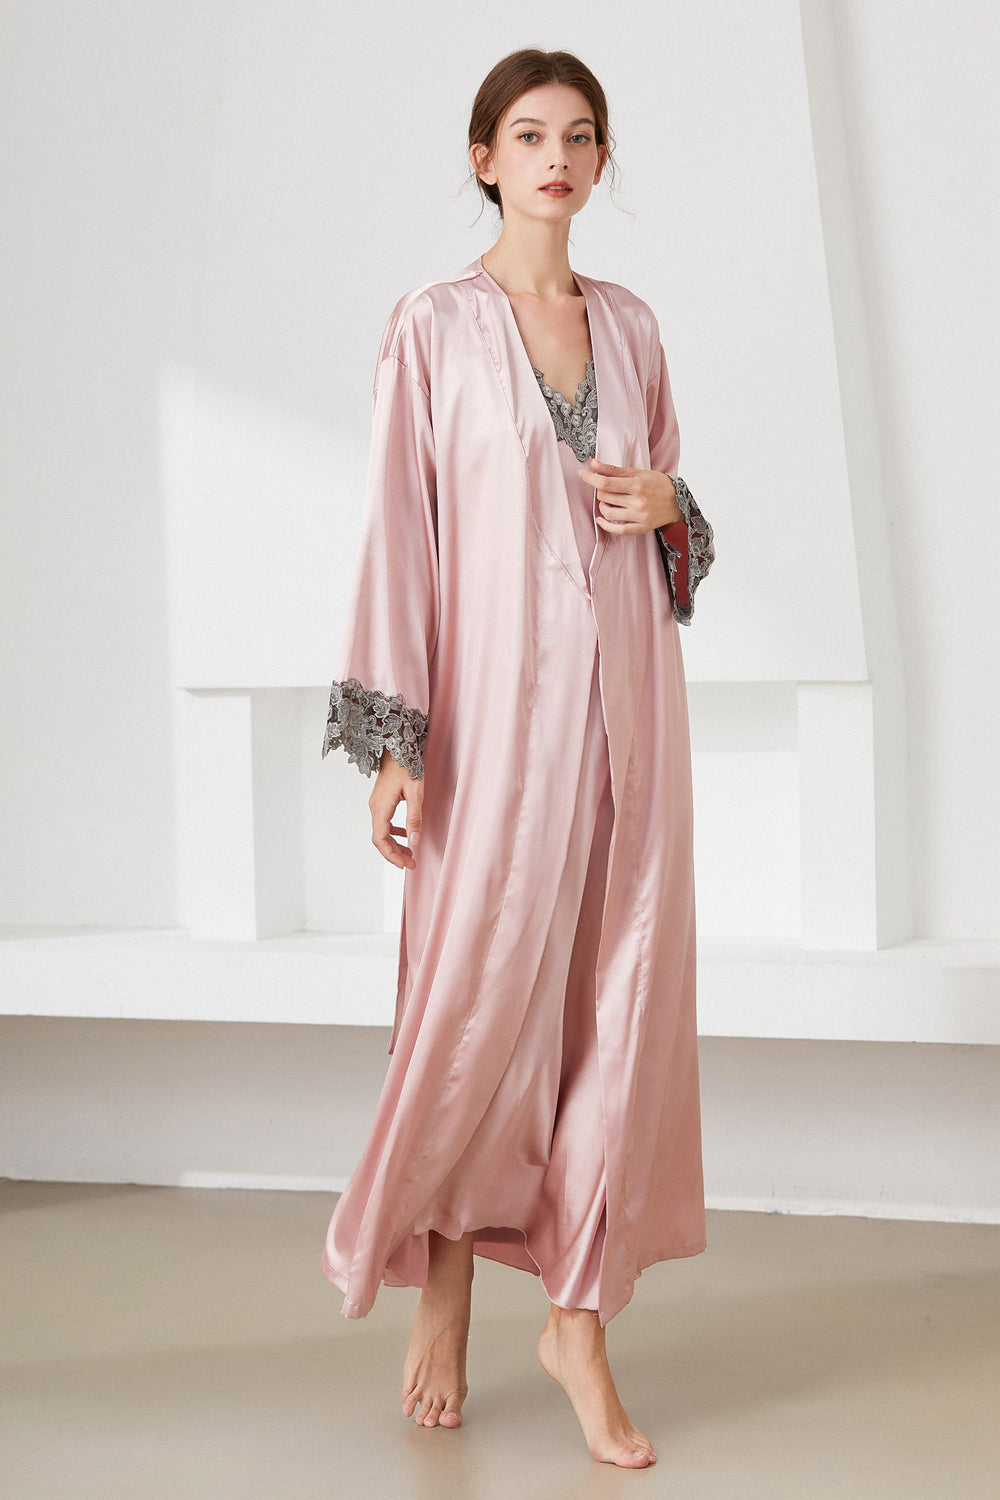 Angle view of woman standing wearing pink  nightdress and matching robe, with lace trim